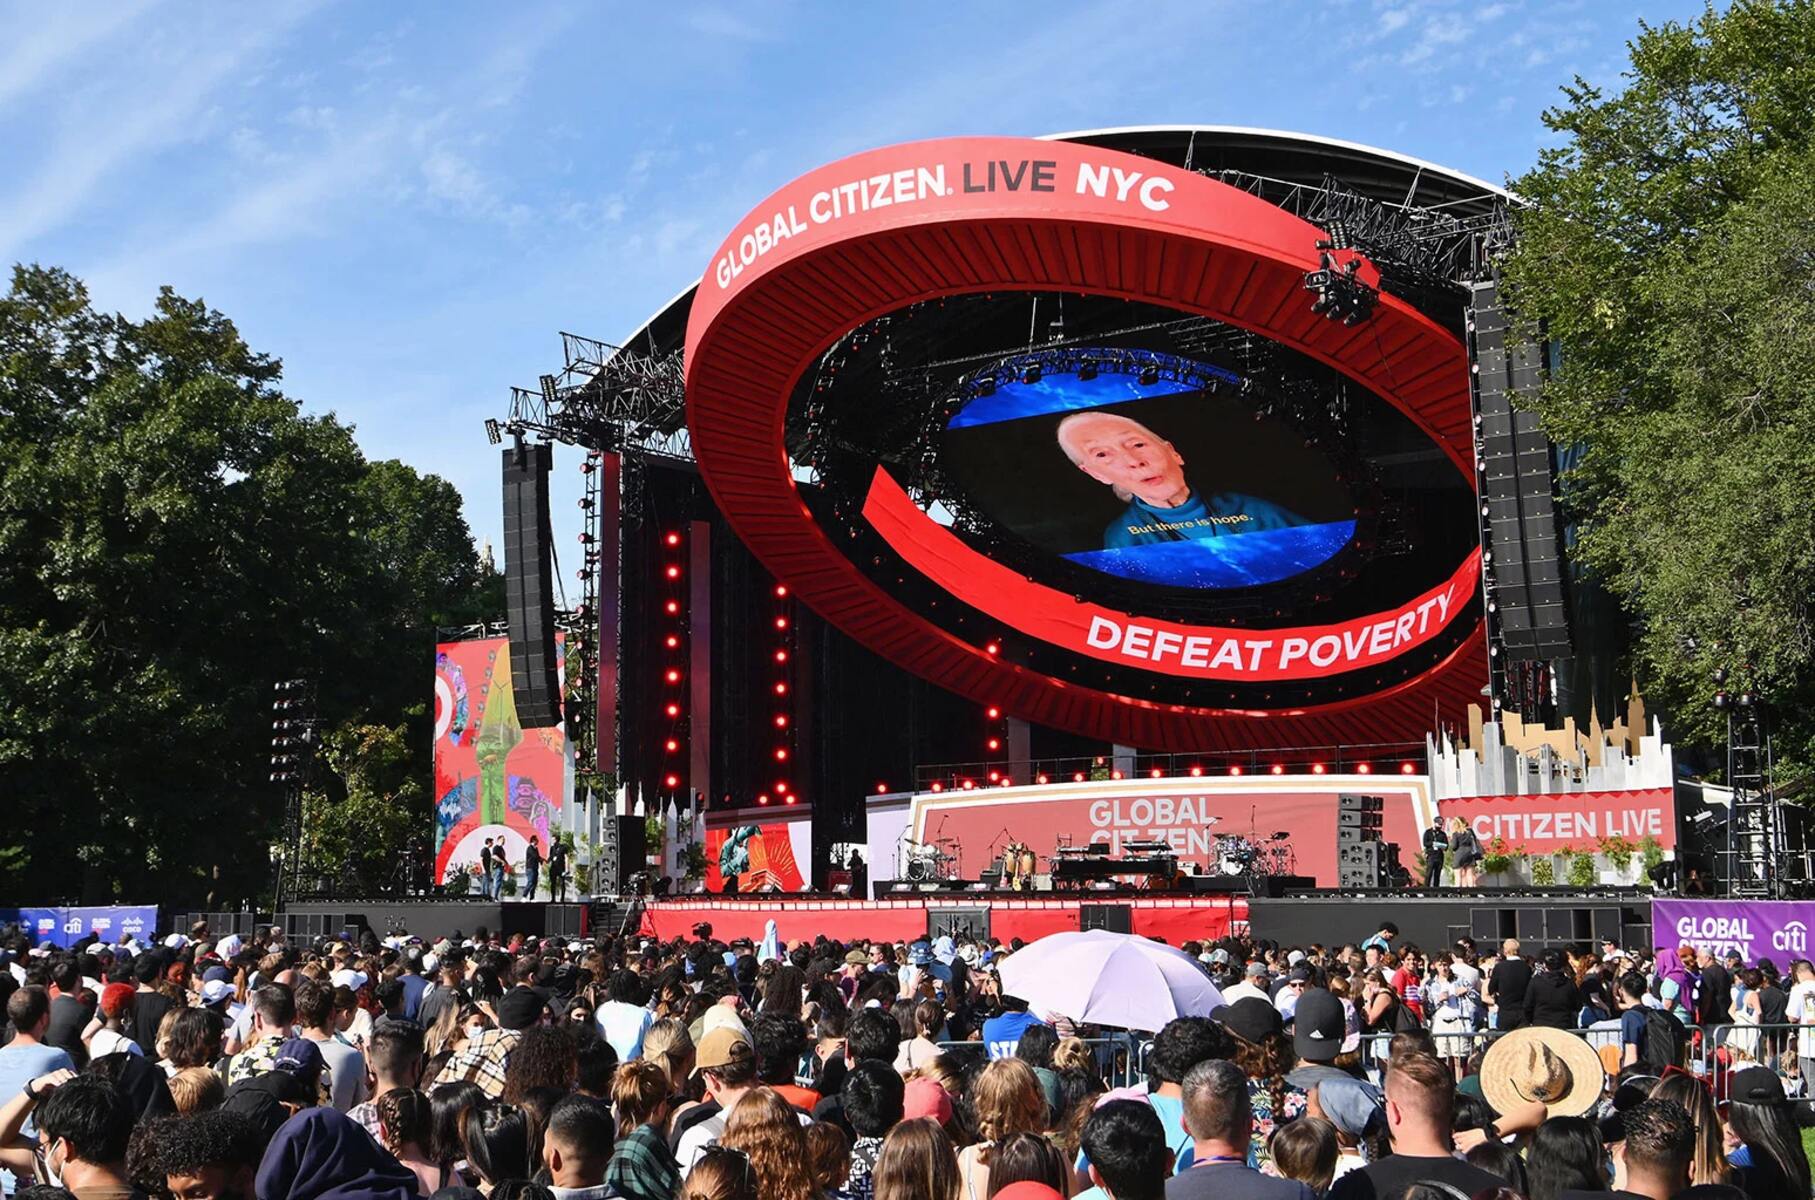 14 Facts About Global Citizen Festival - Facts.net